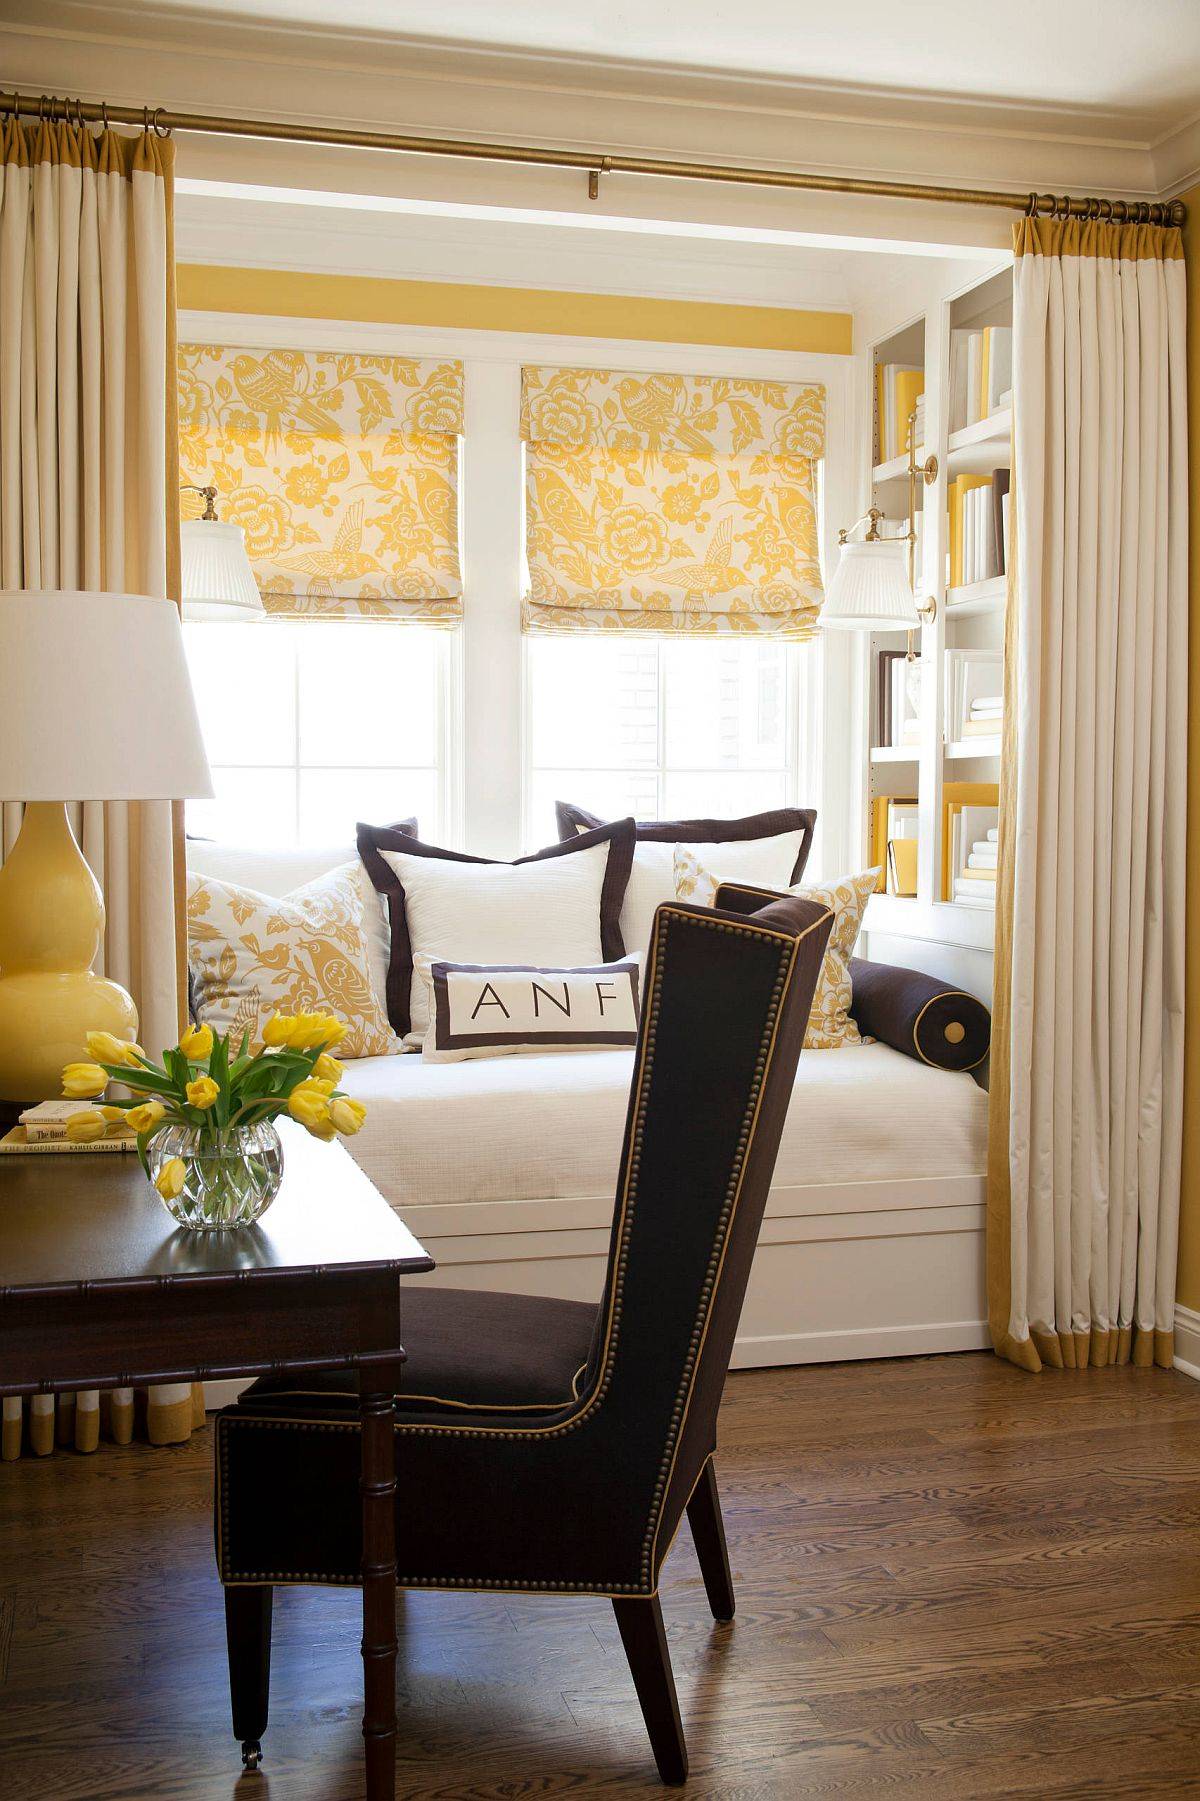 Drapes-for-the-window-seat-make-it-an-even-more-dreamy-and-reclusive-setting-80665